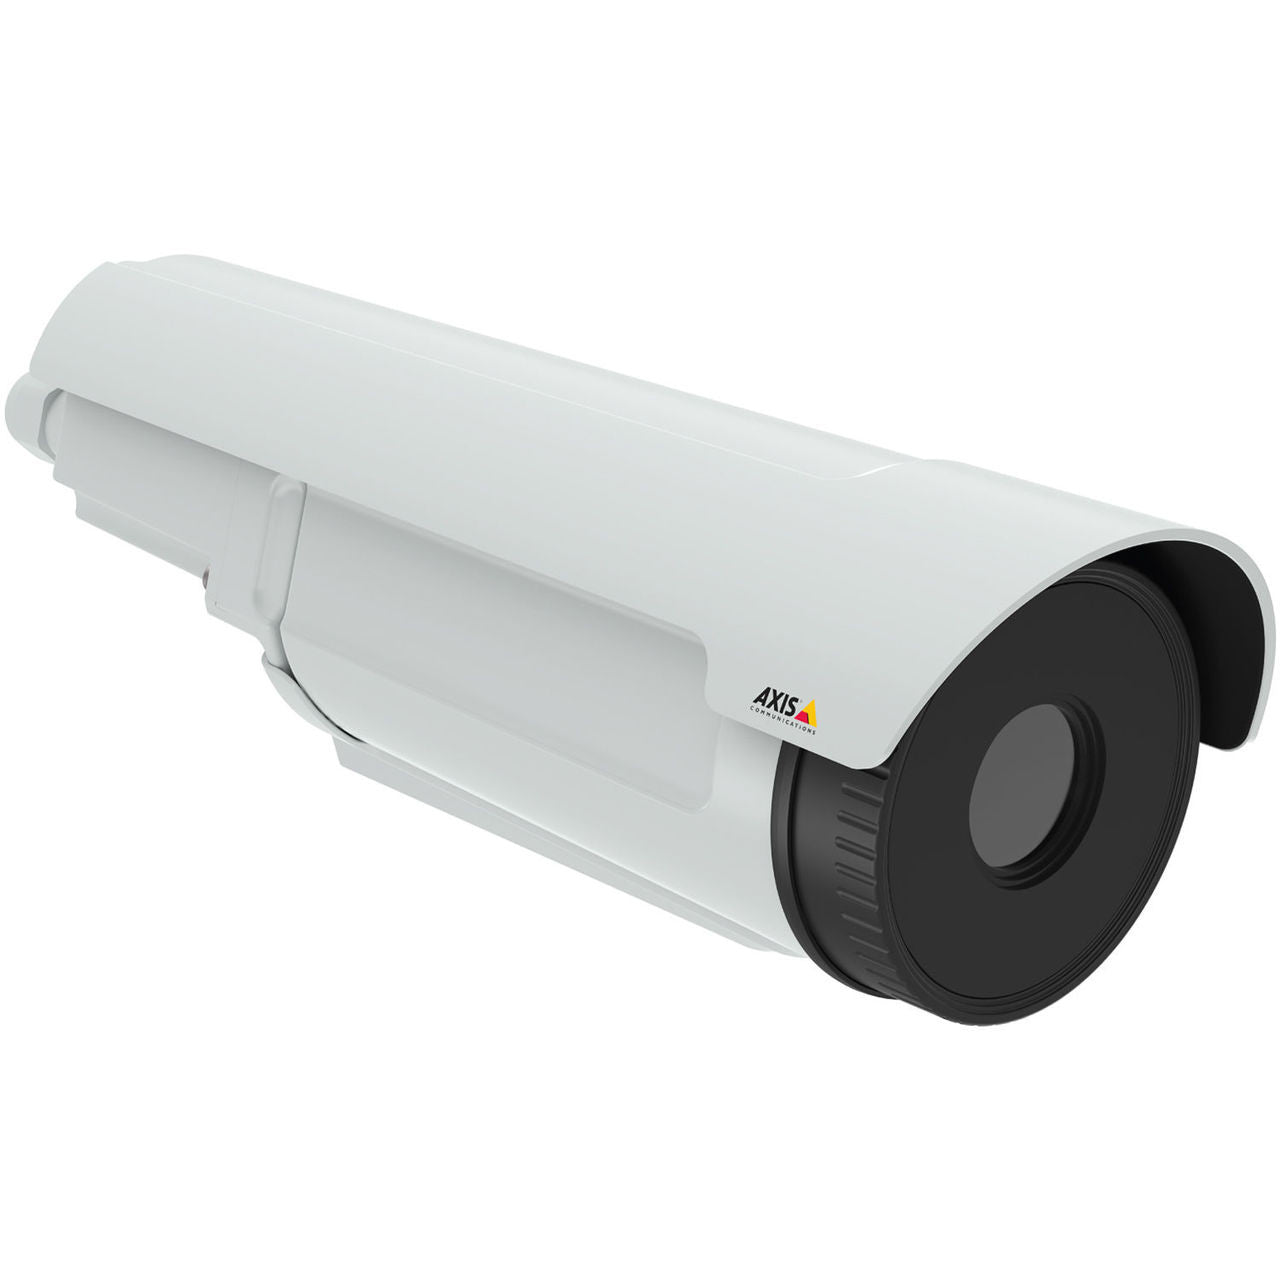 AXIS Q1941-E PT Mount (0974-001) 13mm 30fps Thermal Network Camera